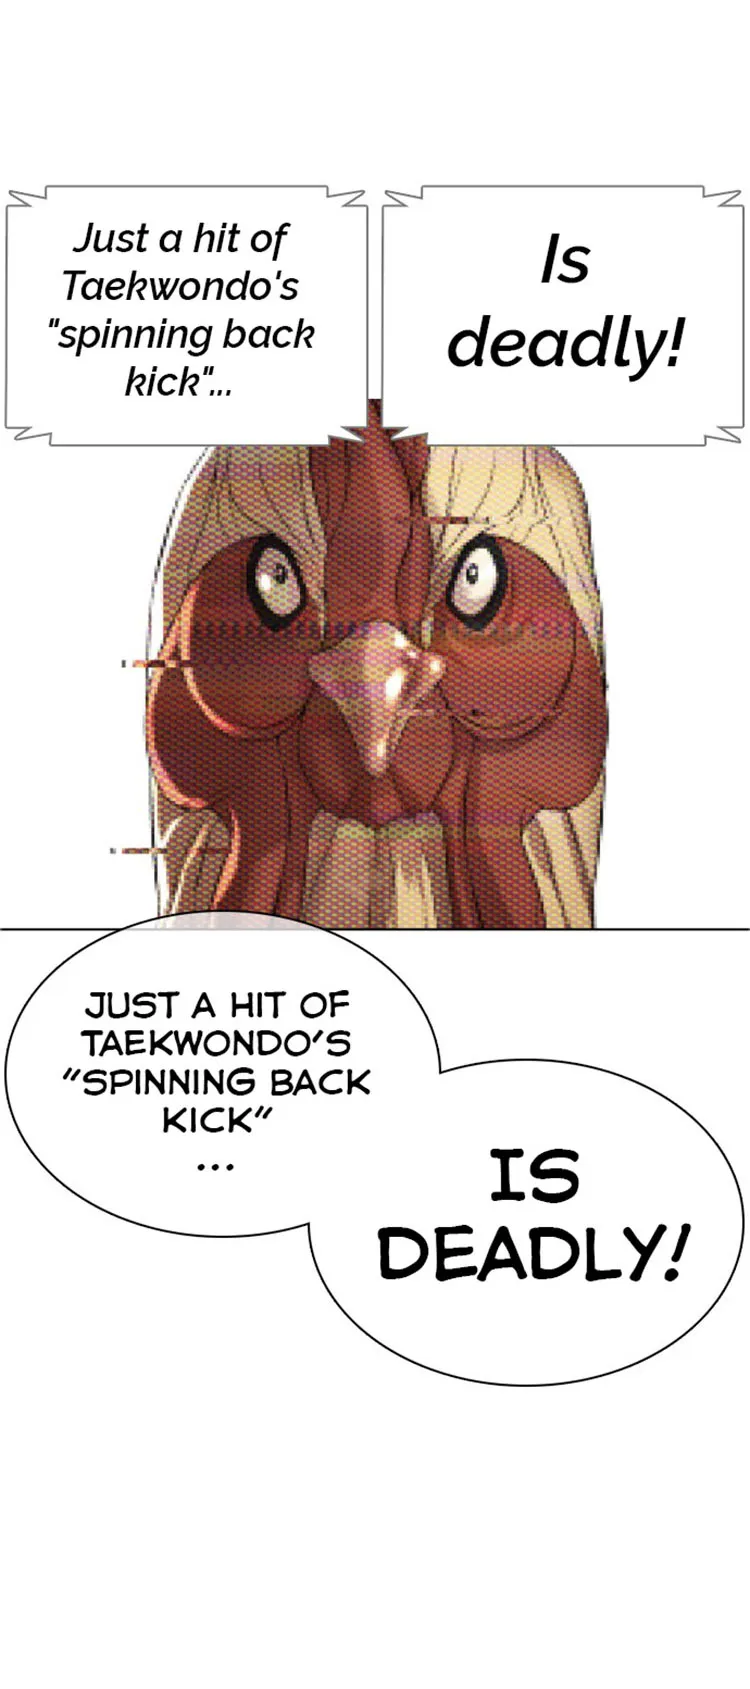 How To Fight Chapter 16  And Win Against Taekwondo page 52